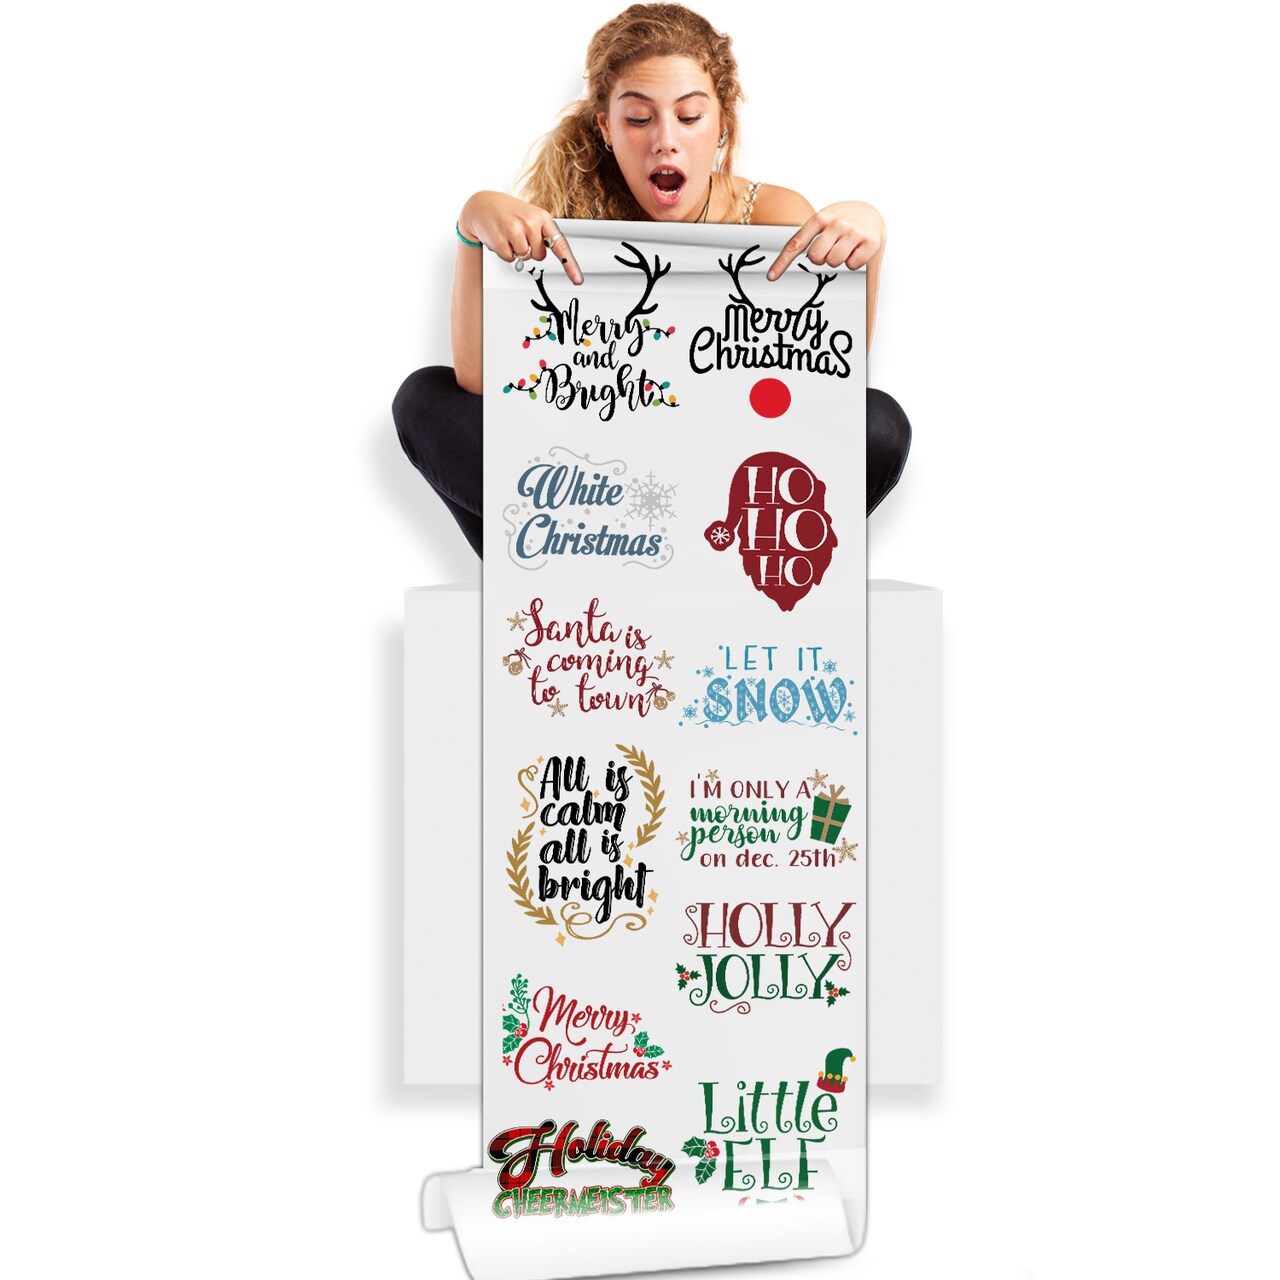 Merry and Bright Christmas Prints DTF (Direct-to-Film) Gang Sheets - 22x60  dtf transfers, ready to press, direct to film, dtf transfers, dtf prints, custom  heat transfers, Heat Transfers Sheets, digital prints, Bulk